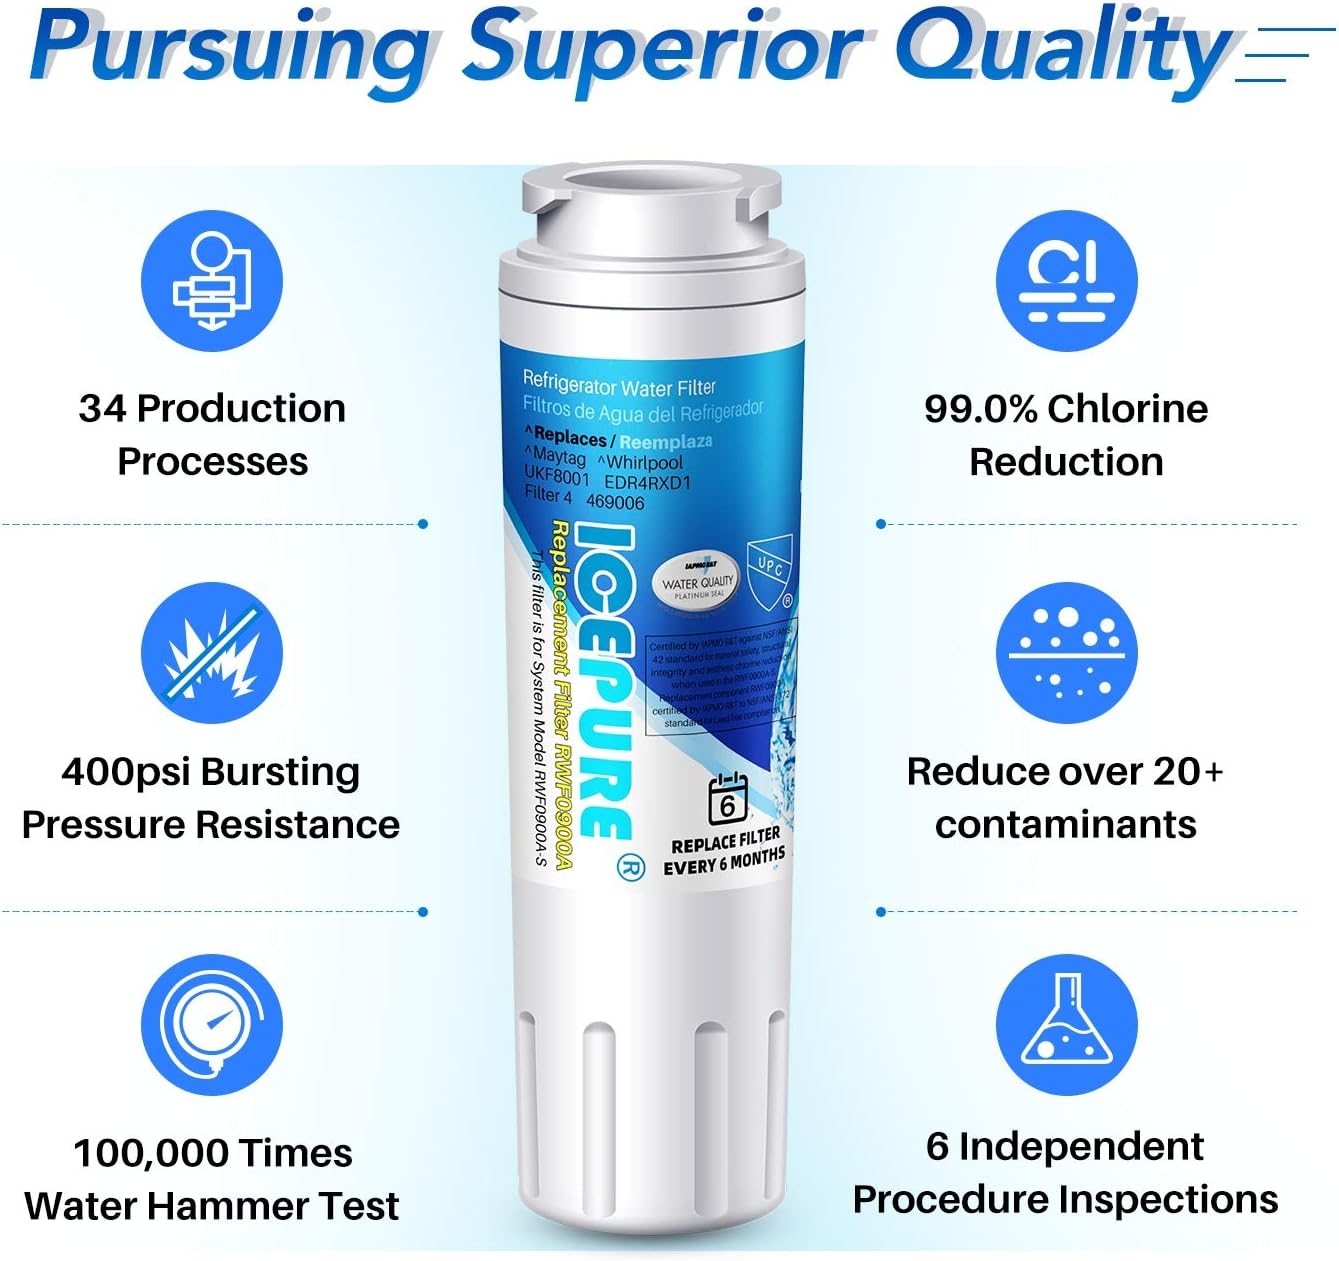 ICEPURE UKF8001 Replacement Refrigerator Water Filter, Compatible with Maytag UKF8001, UKF8001AXX, UKF8001P, Whirlpool 4396395, 469006, EDR4RXD1, EveryDrop Filter 4, Puriclean II, RWF0900A 2PACK